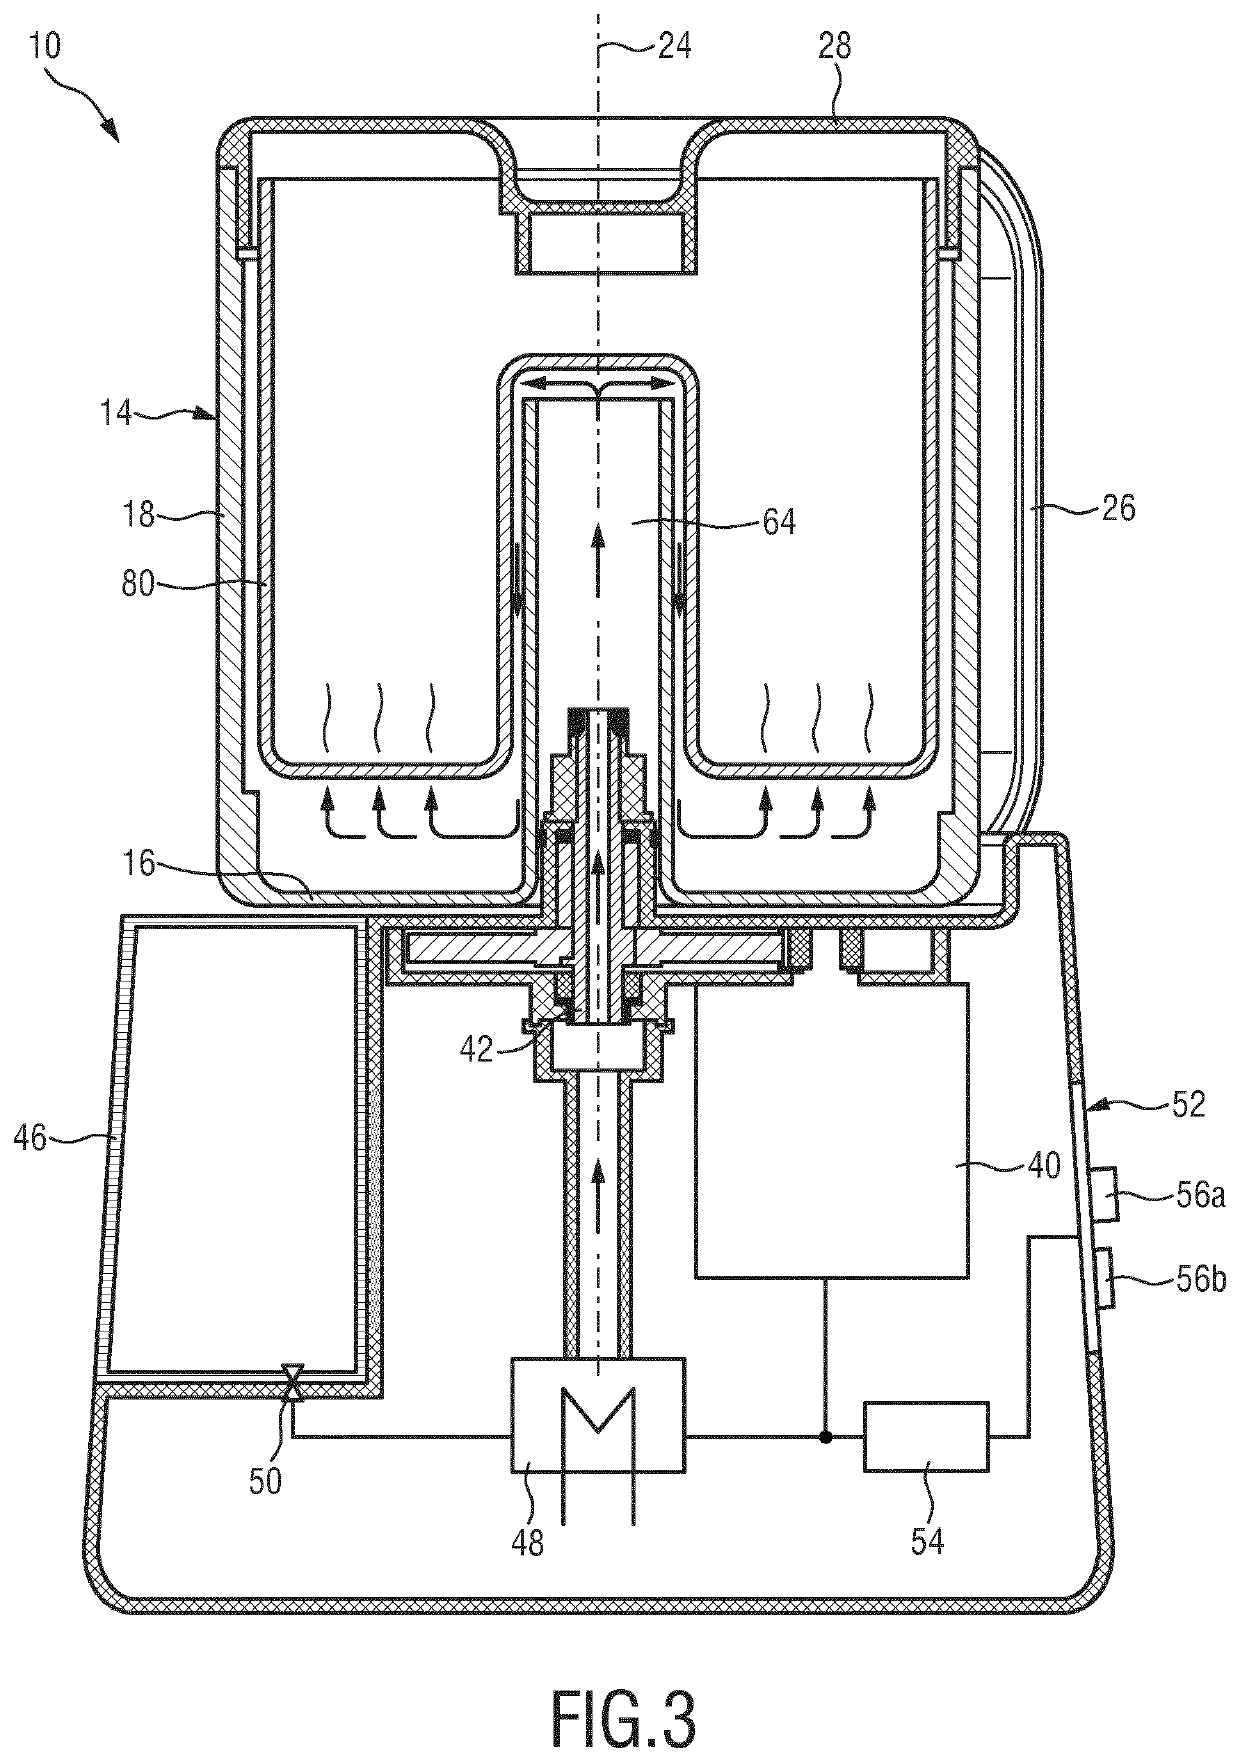 Apparatus for steaming and blending a food product